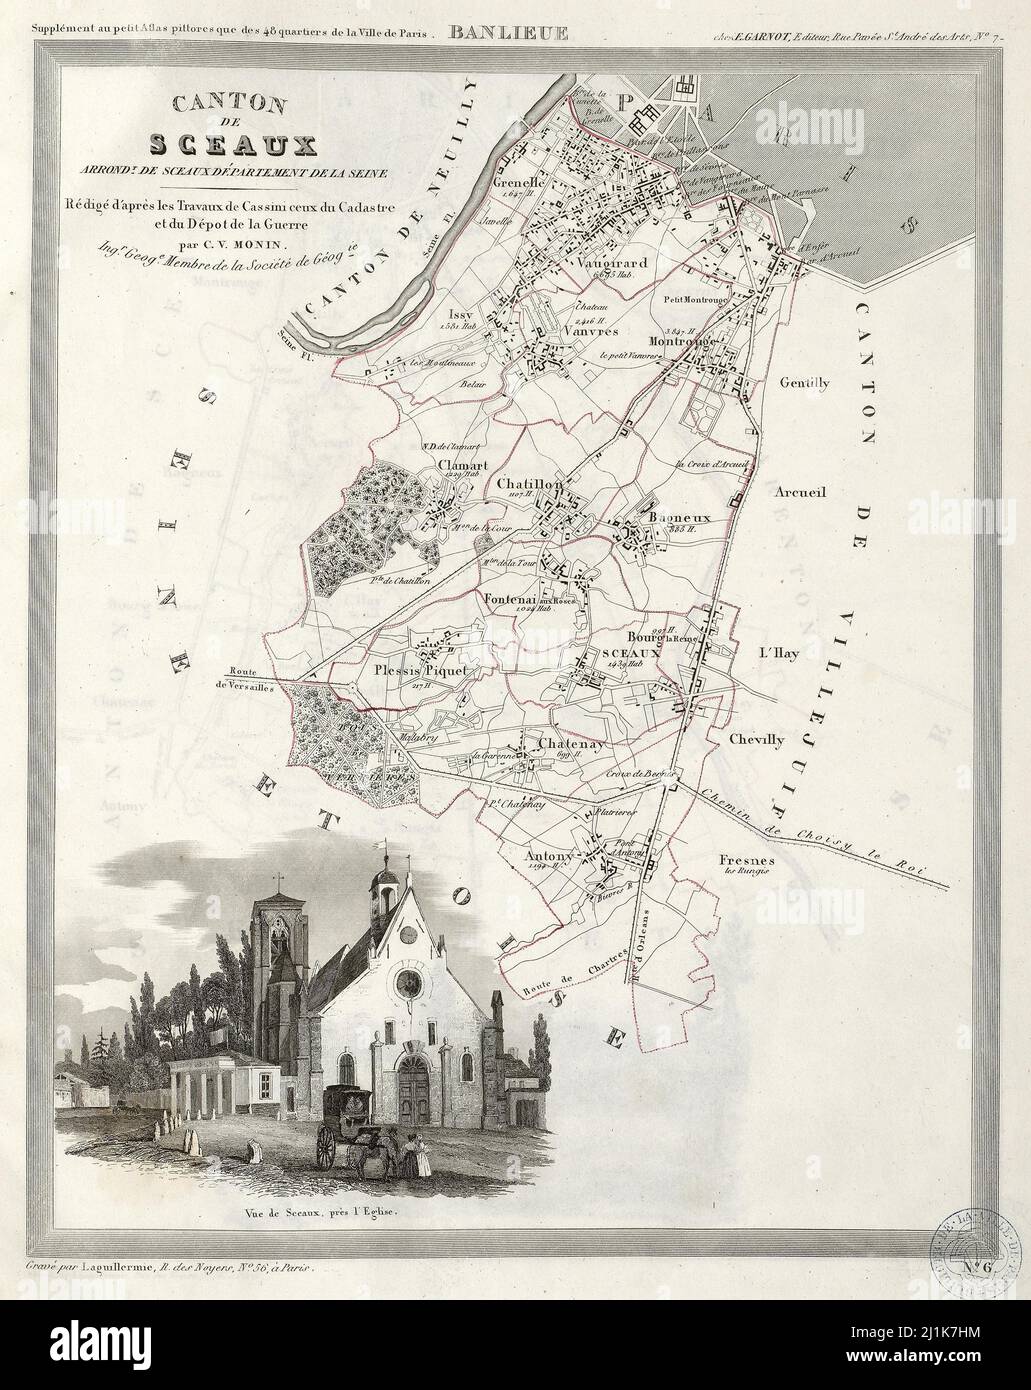 Vintage map France cantons 19th century. All maps are beautifully hand drawn and illustrated showing France at the time. Stock Photo